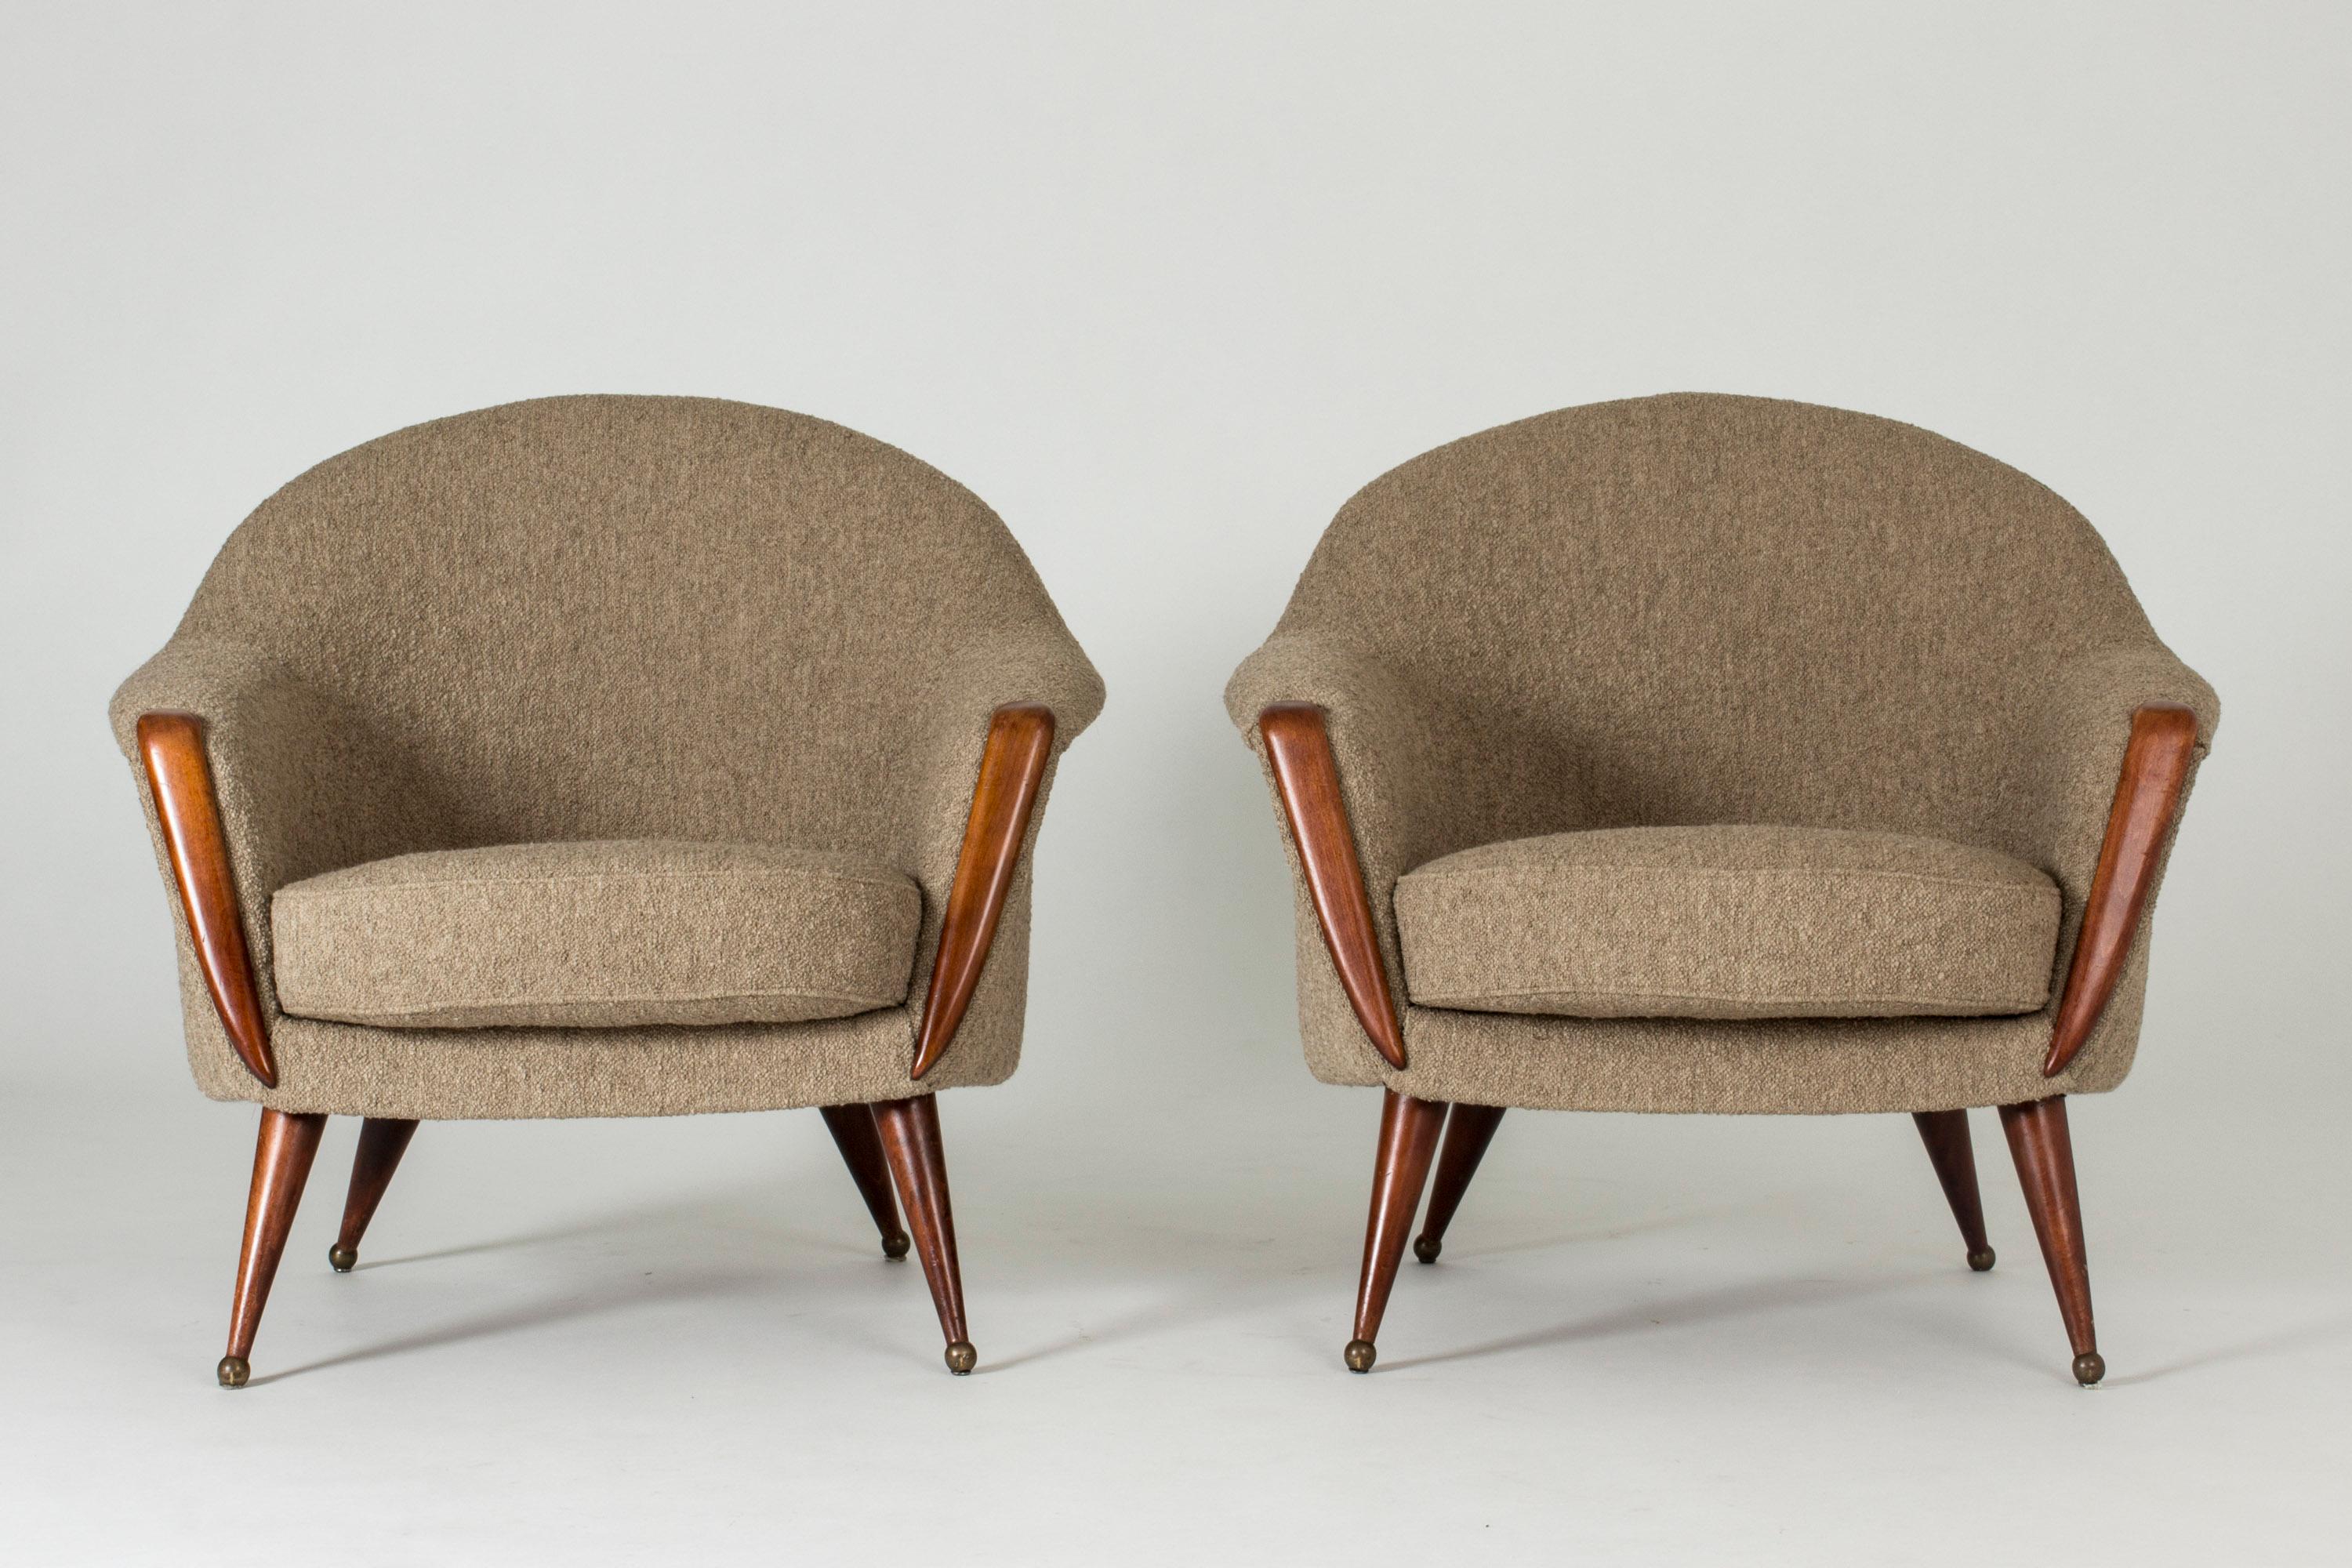 Pair of “Orion” lounge chairs by Folke Jansson, in a rounded design. Brown wooden legs and details on the front, round brass ball feet. Bouclé upholstery.